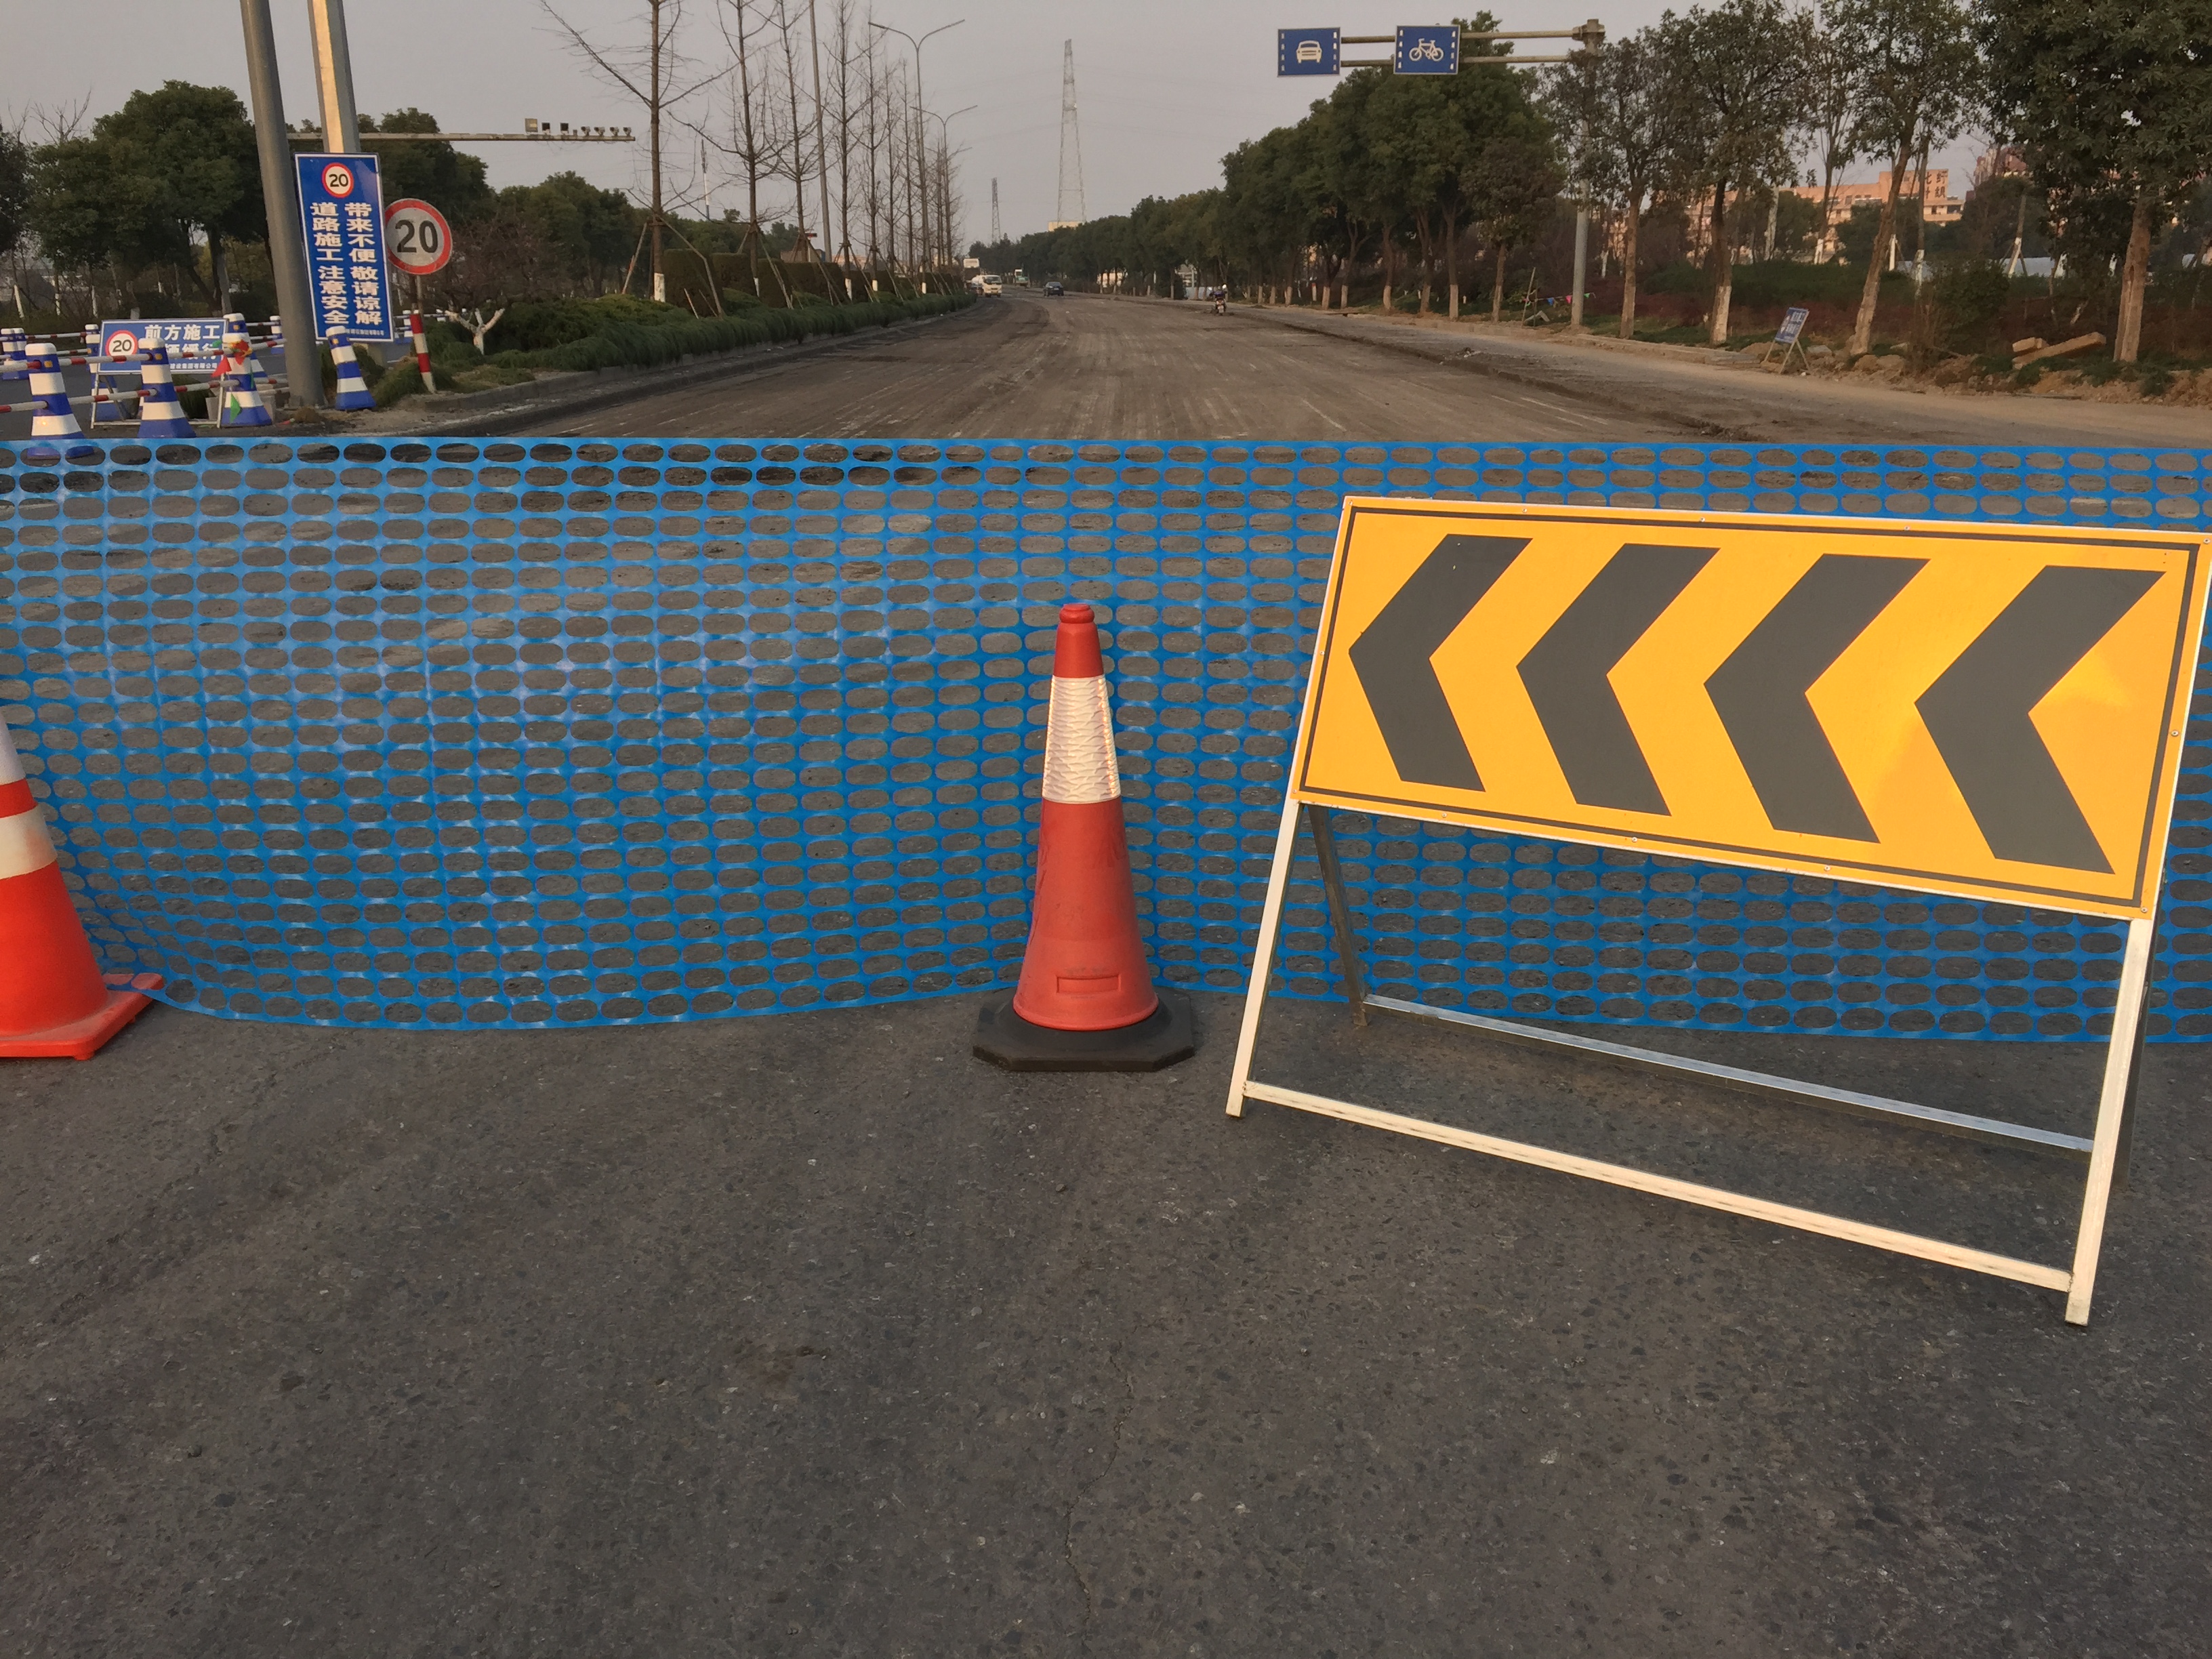 Customized Blue Crowd Control Barrier Mesh